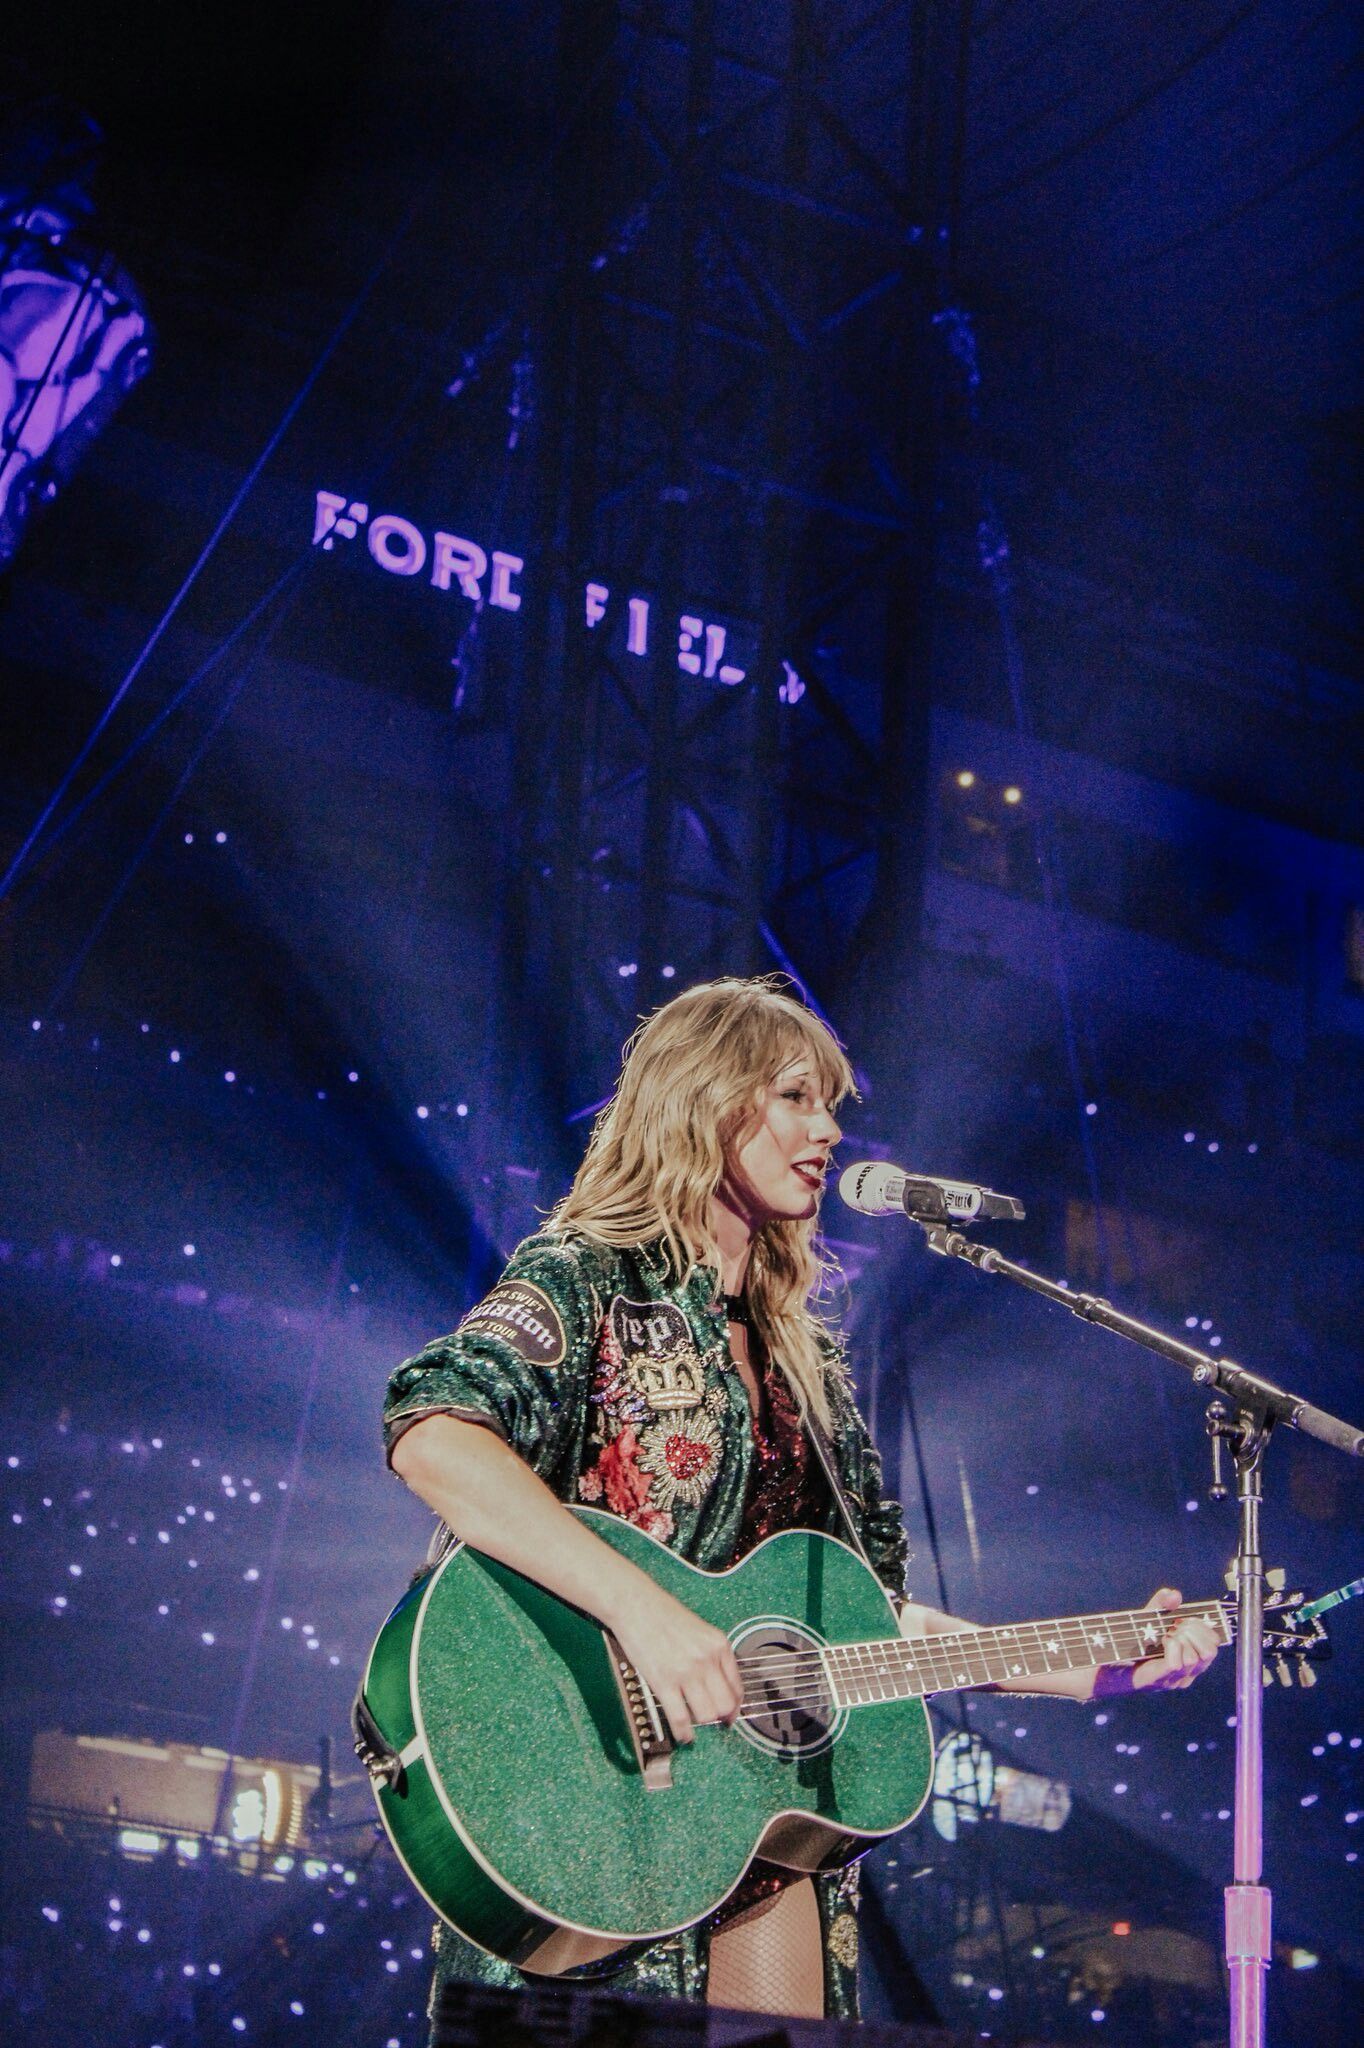 Taylor Swift. Taylor swift wallpaper, Taylor swift concert, Taylor swift picture